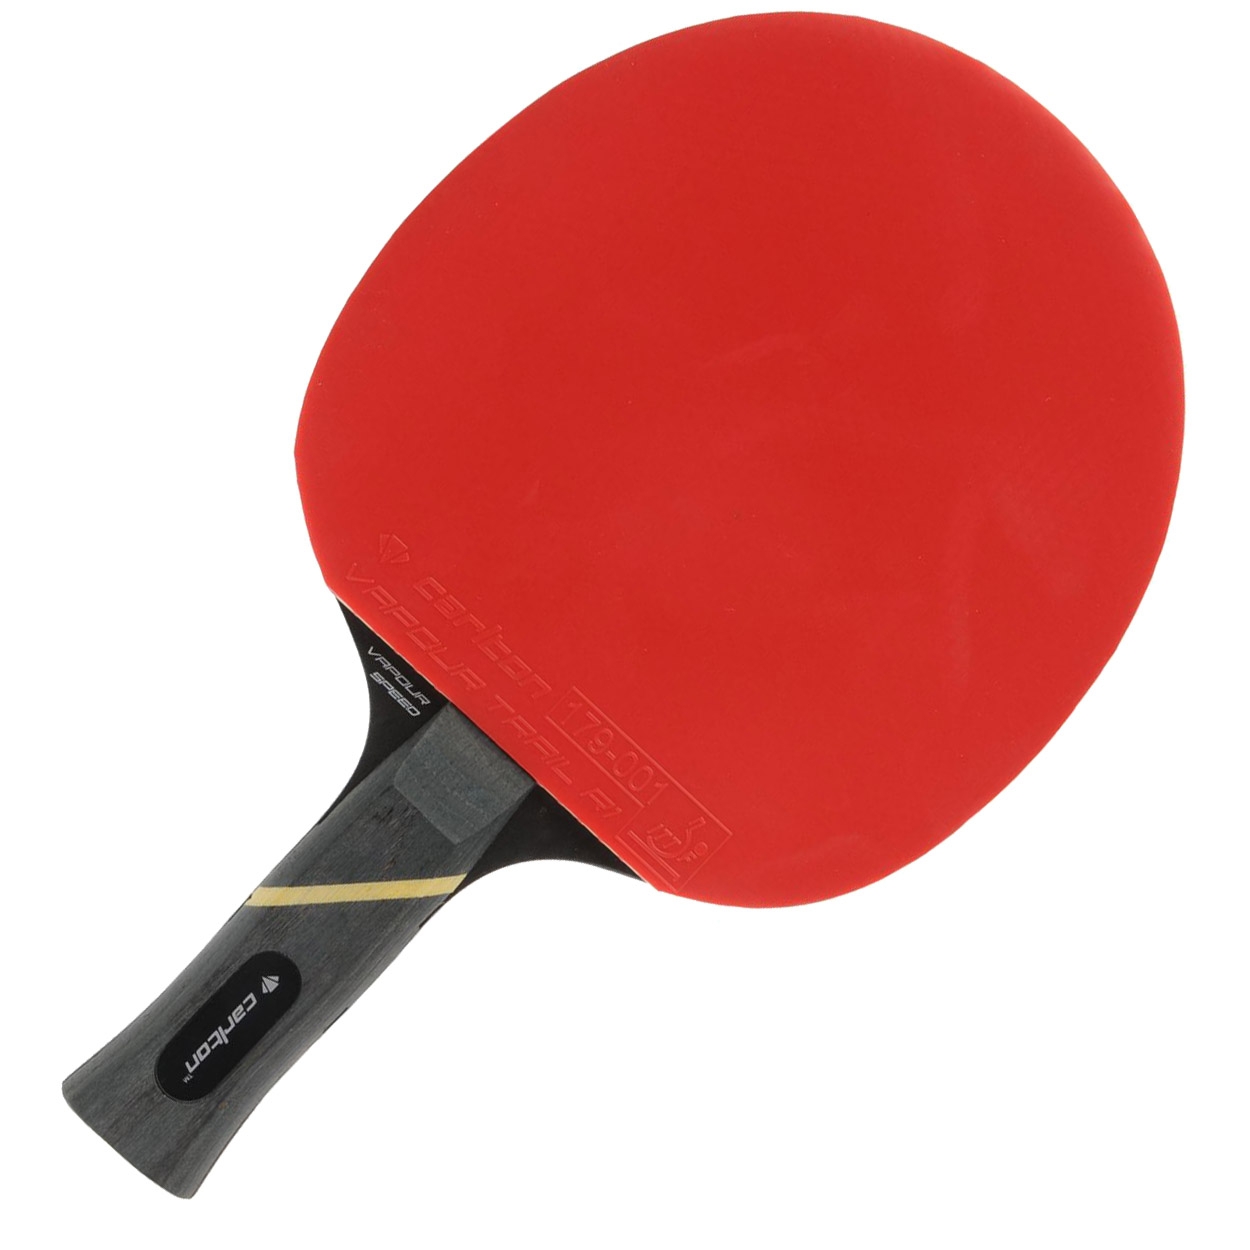 Table Tennis Shops to Buy Table Tennis Equipment